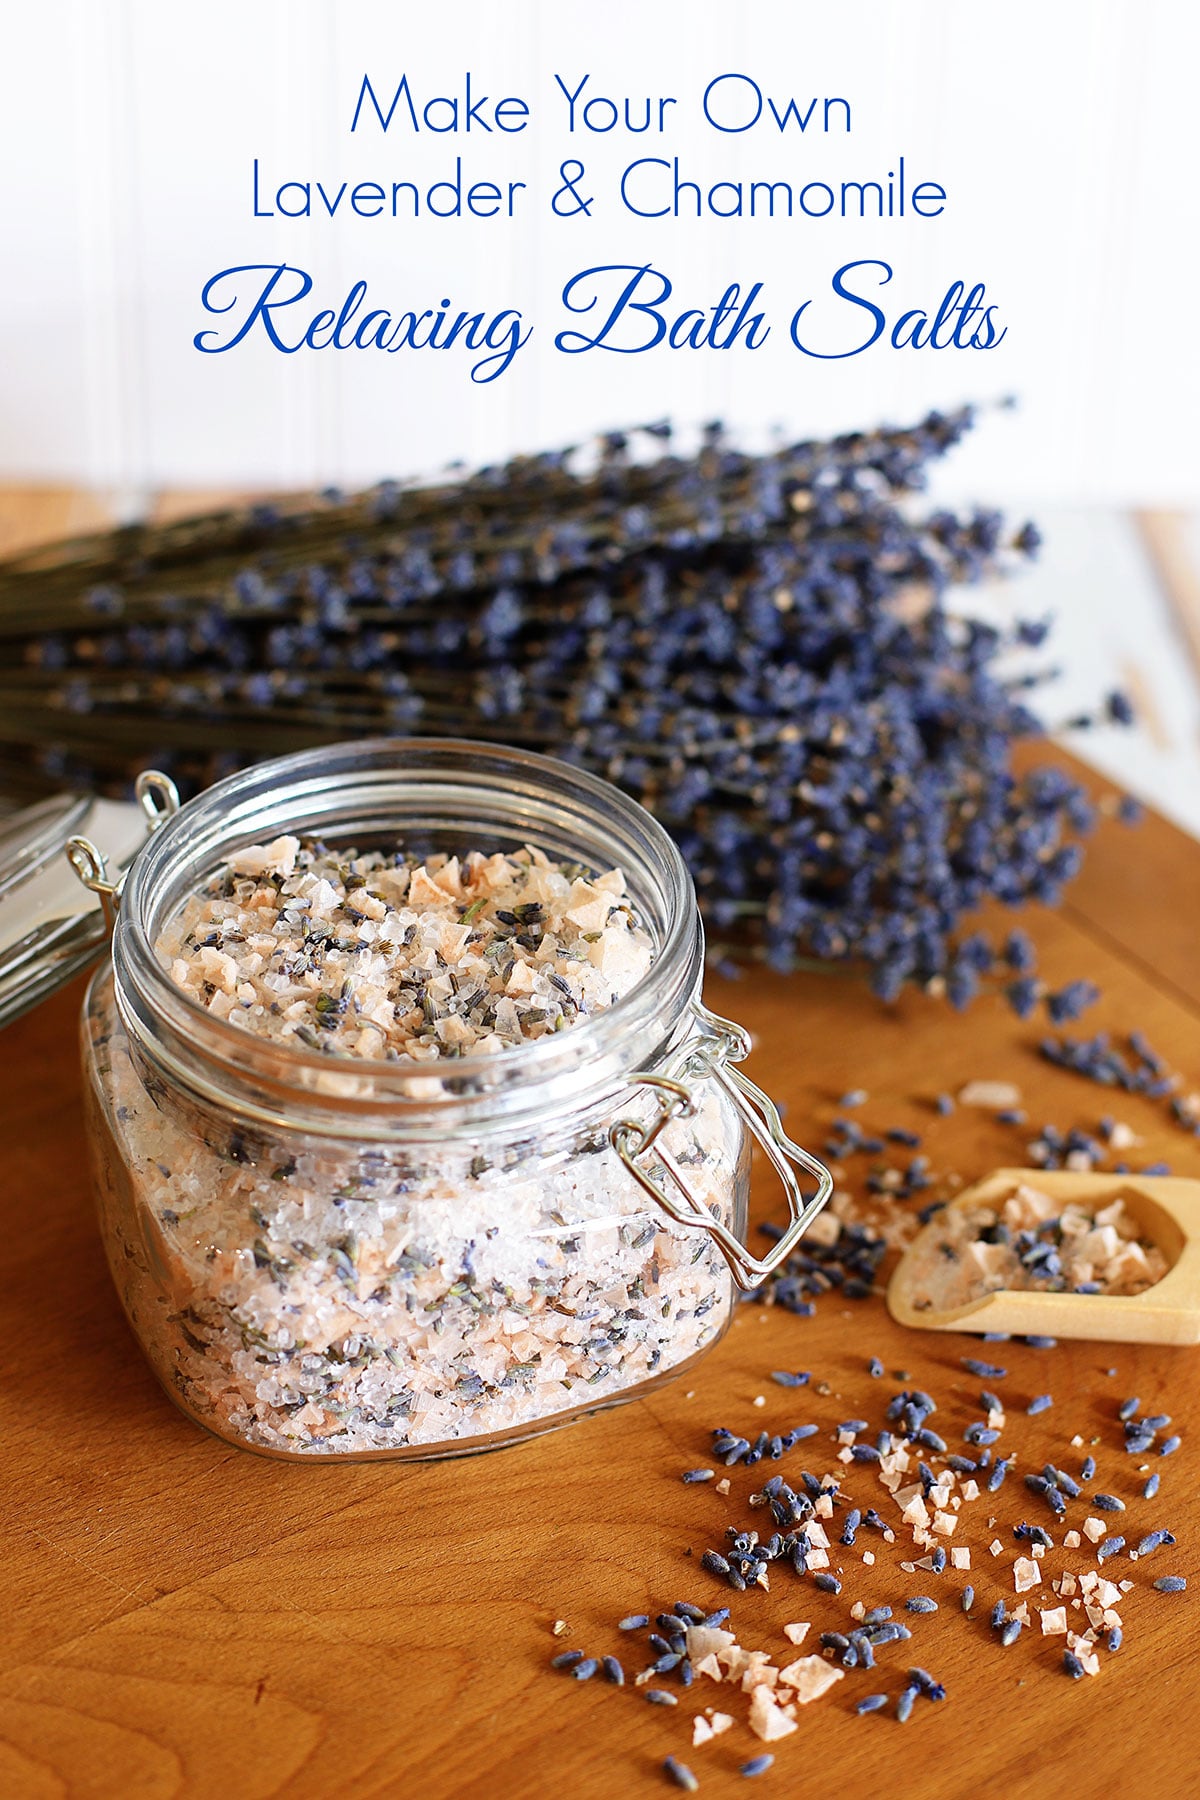 Learn how to make lavender bath salts inexpensively at home. These beautiful lavender bath salts are simple to make and a wonderful gift to give during the holidays, for Mother's Day or as wedding favors. See how to make them here.